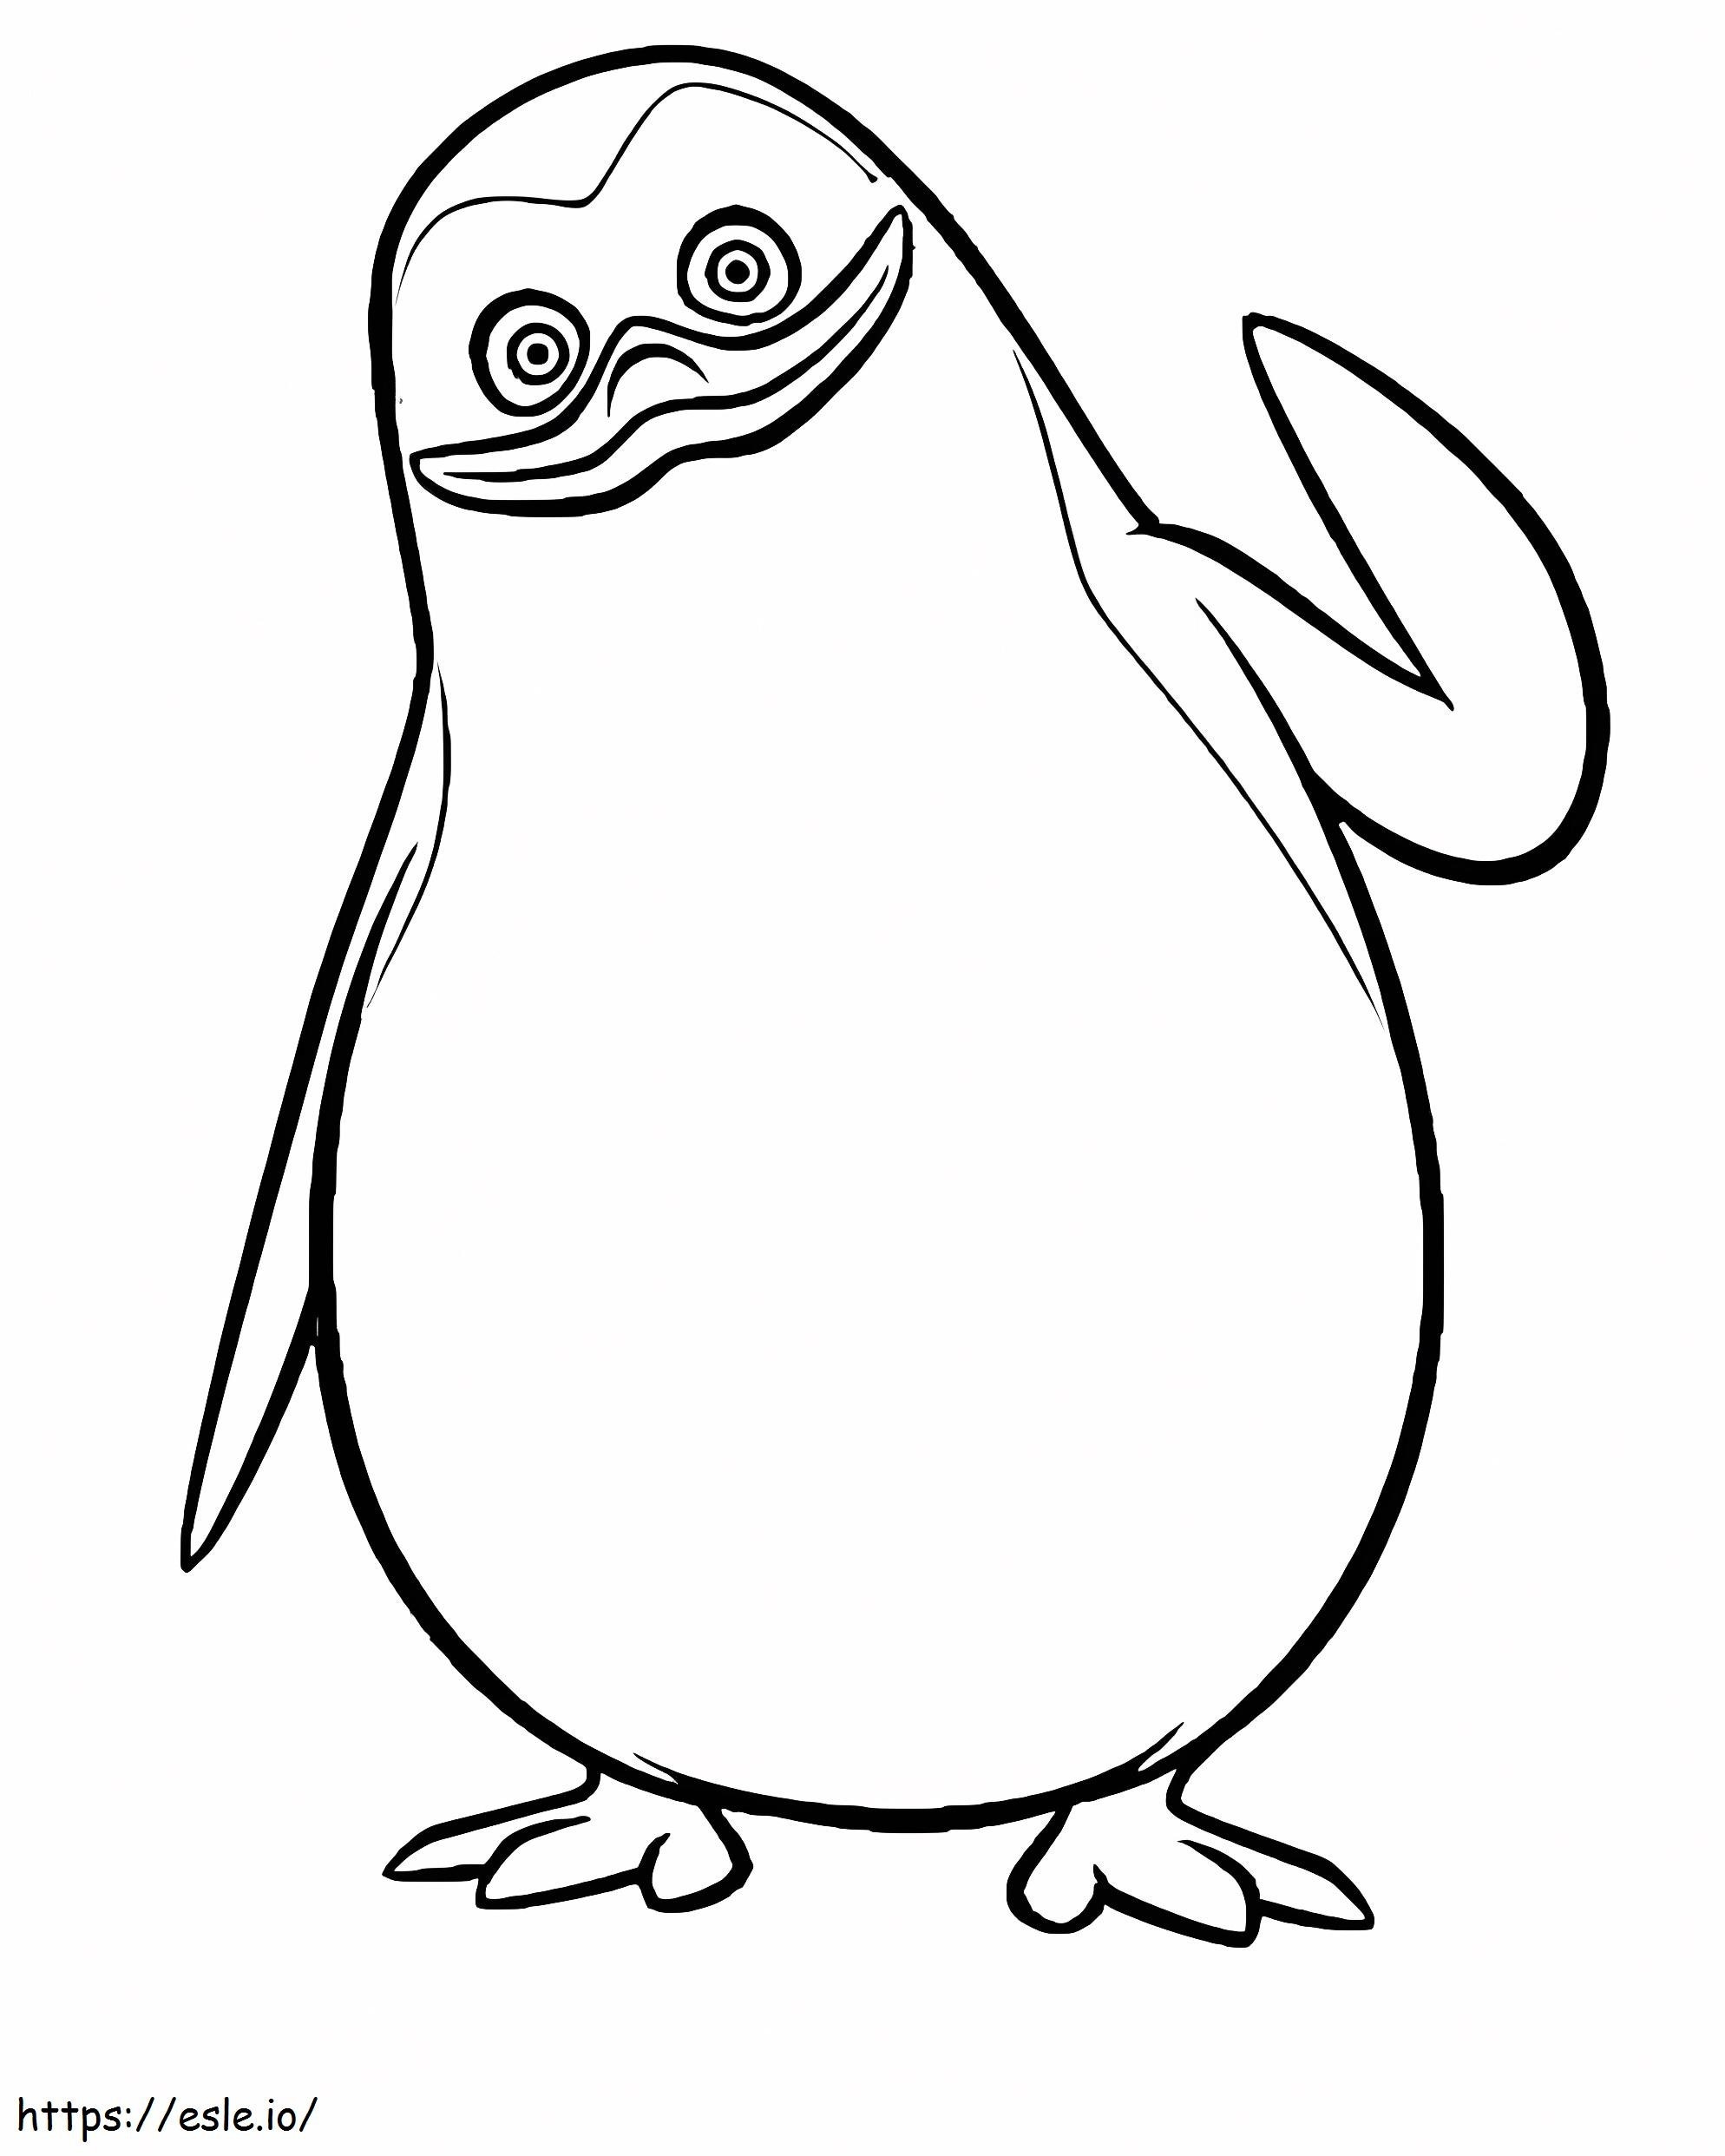 Private Penguins Of Madagascar coloring page